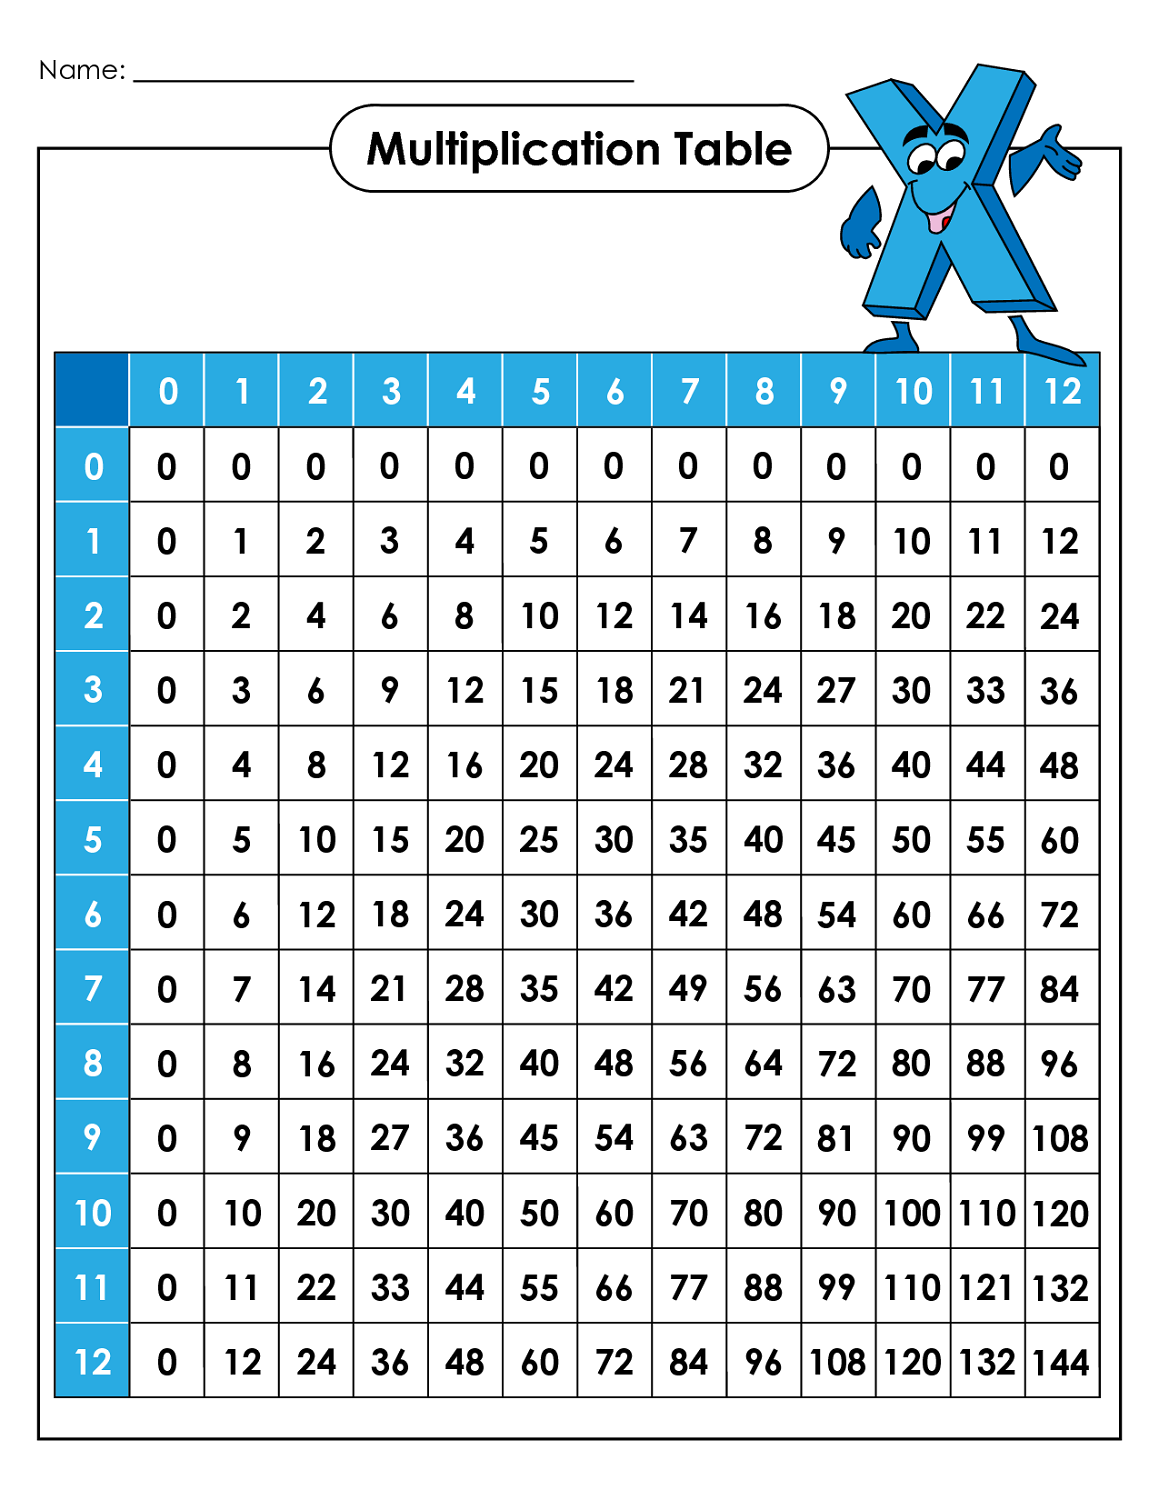 1-12 times tables blue